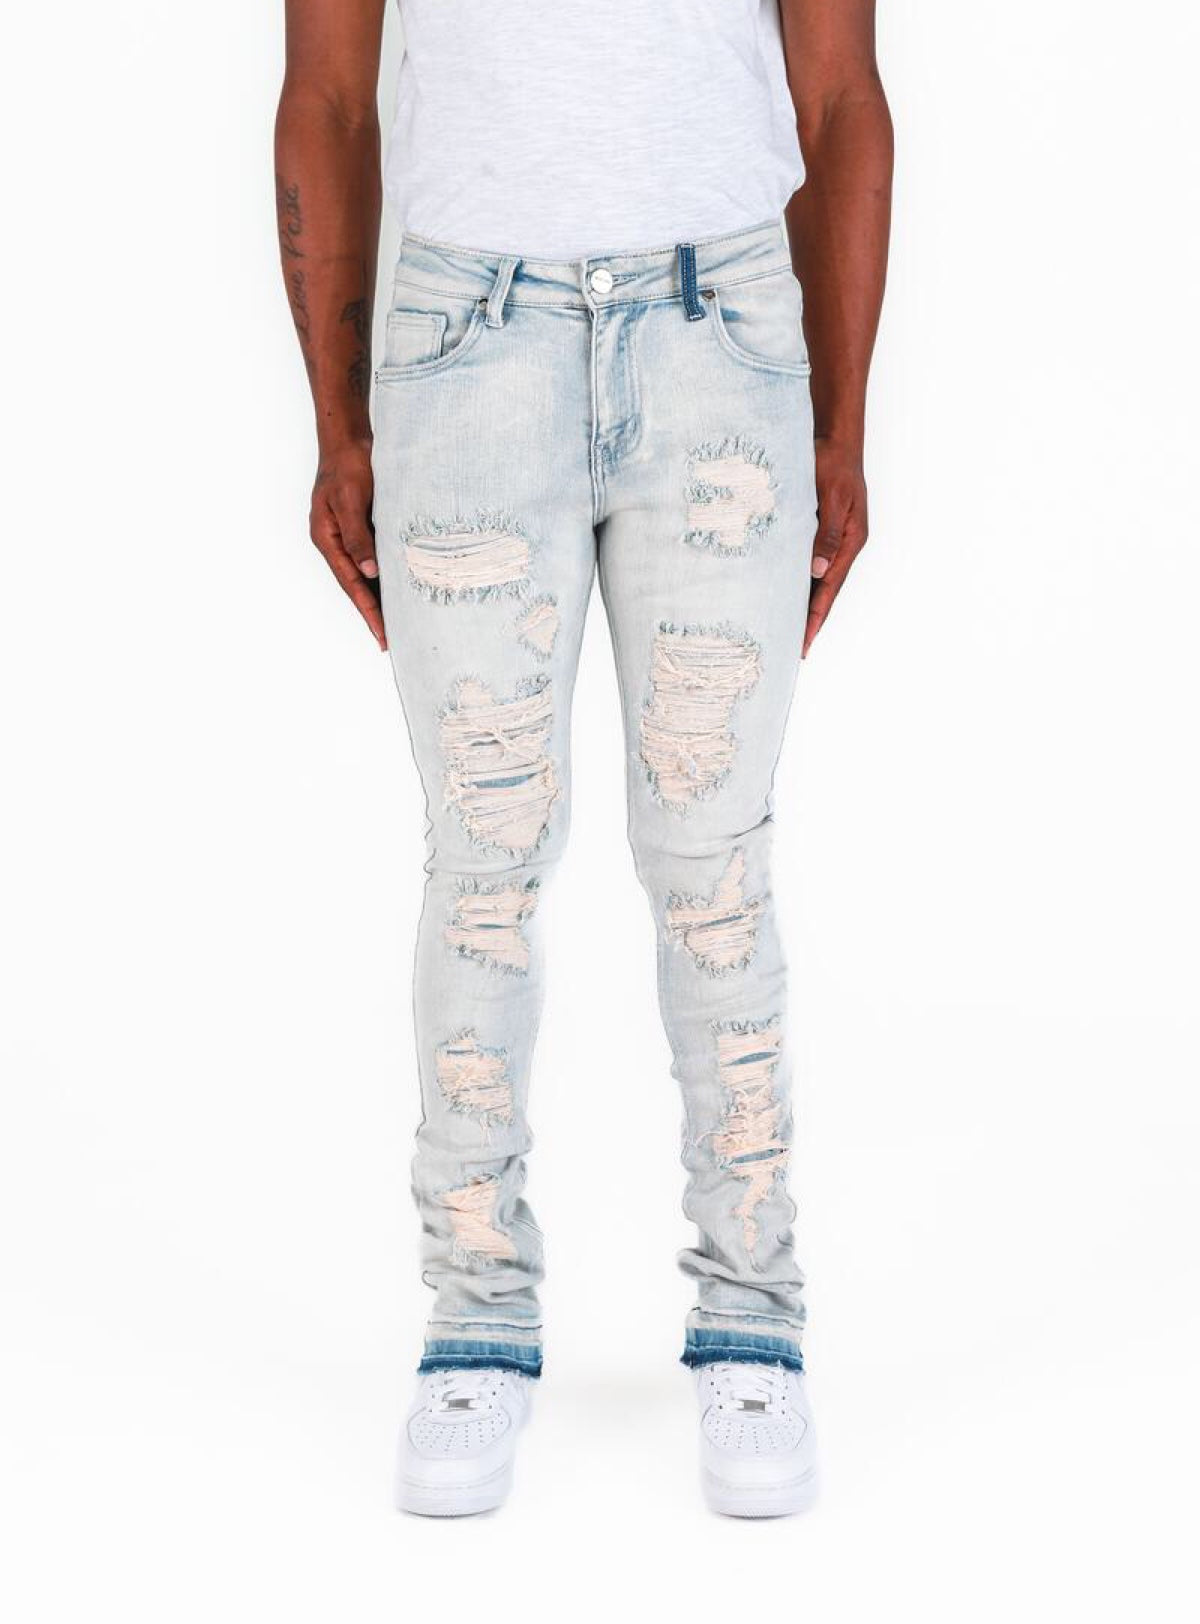 Pheelings Jeans - Seize The Day - Flare Stacked - Light Blue Sand Wash ...